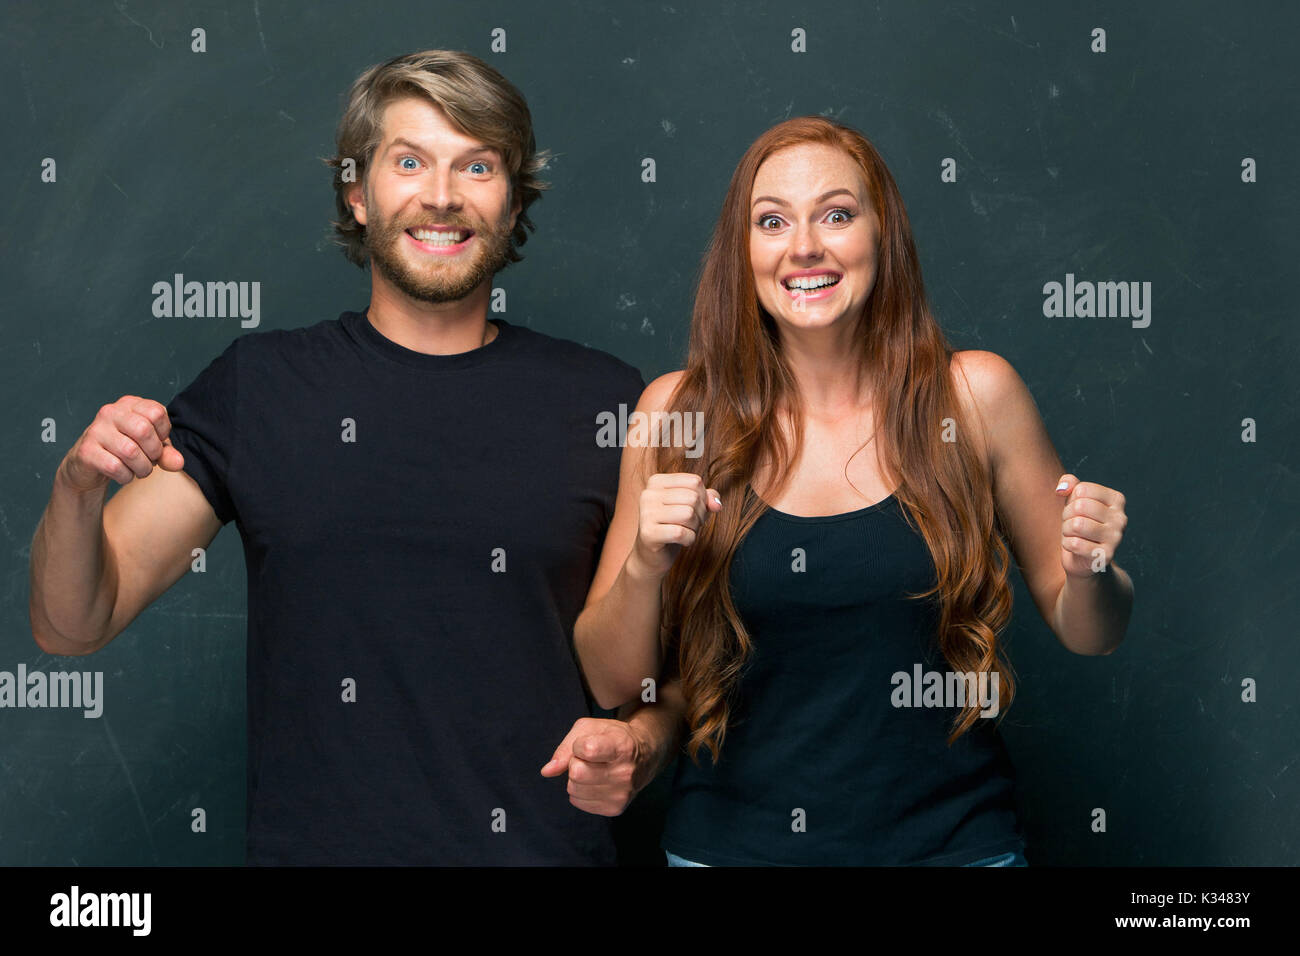 The love, family, sports, entretainment and happiness concept Stock Photo